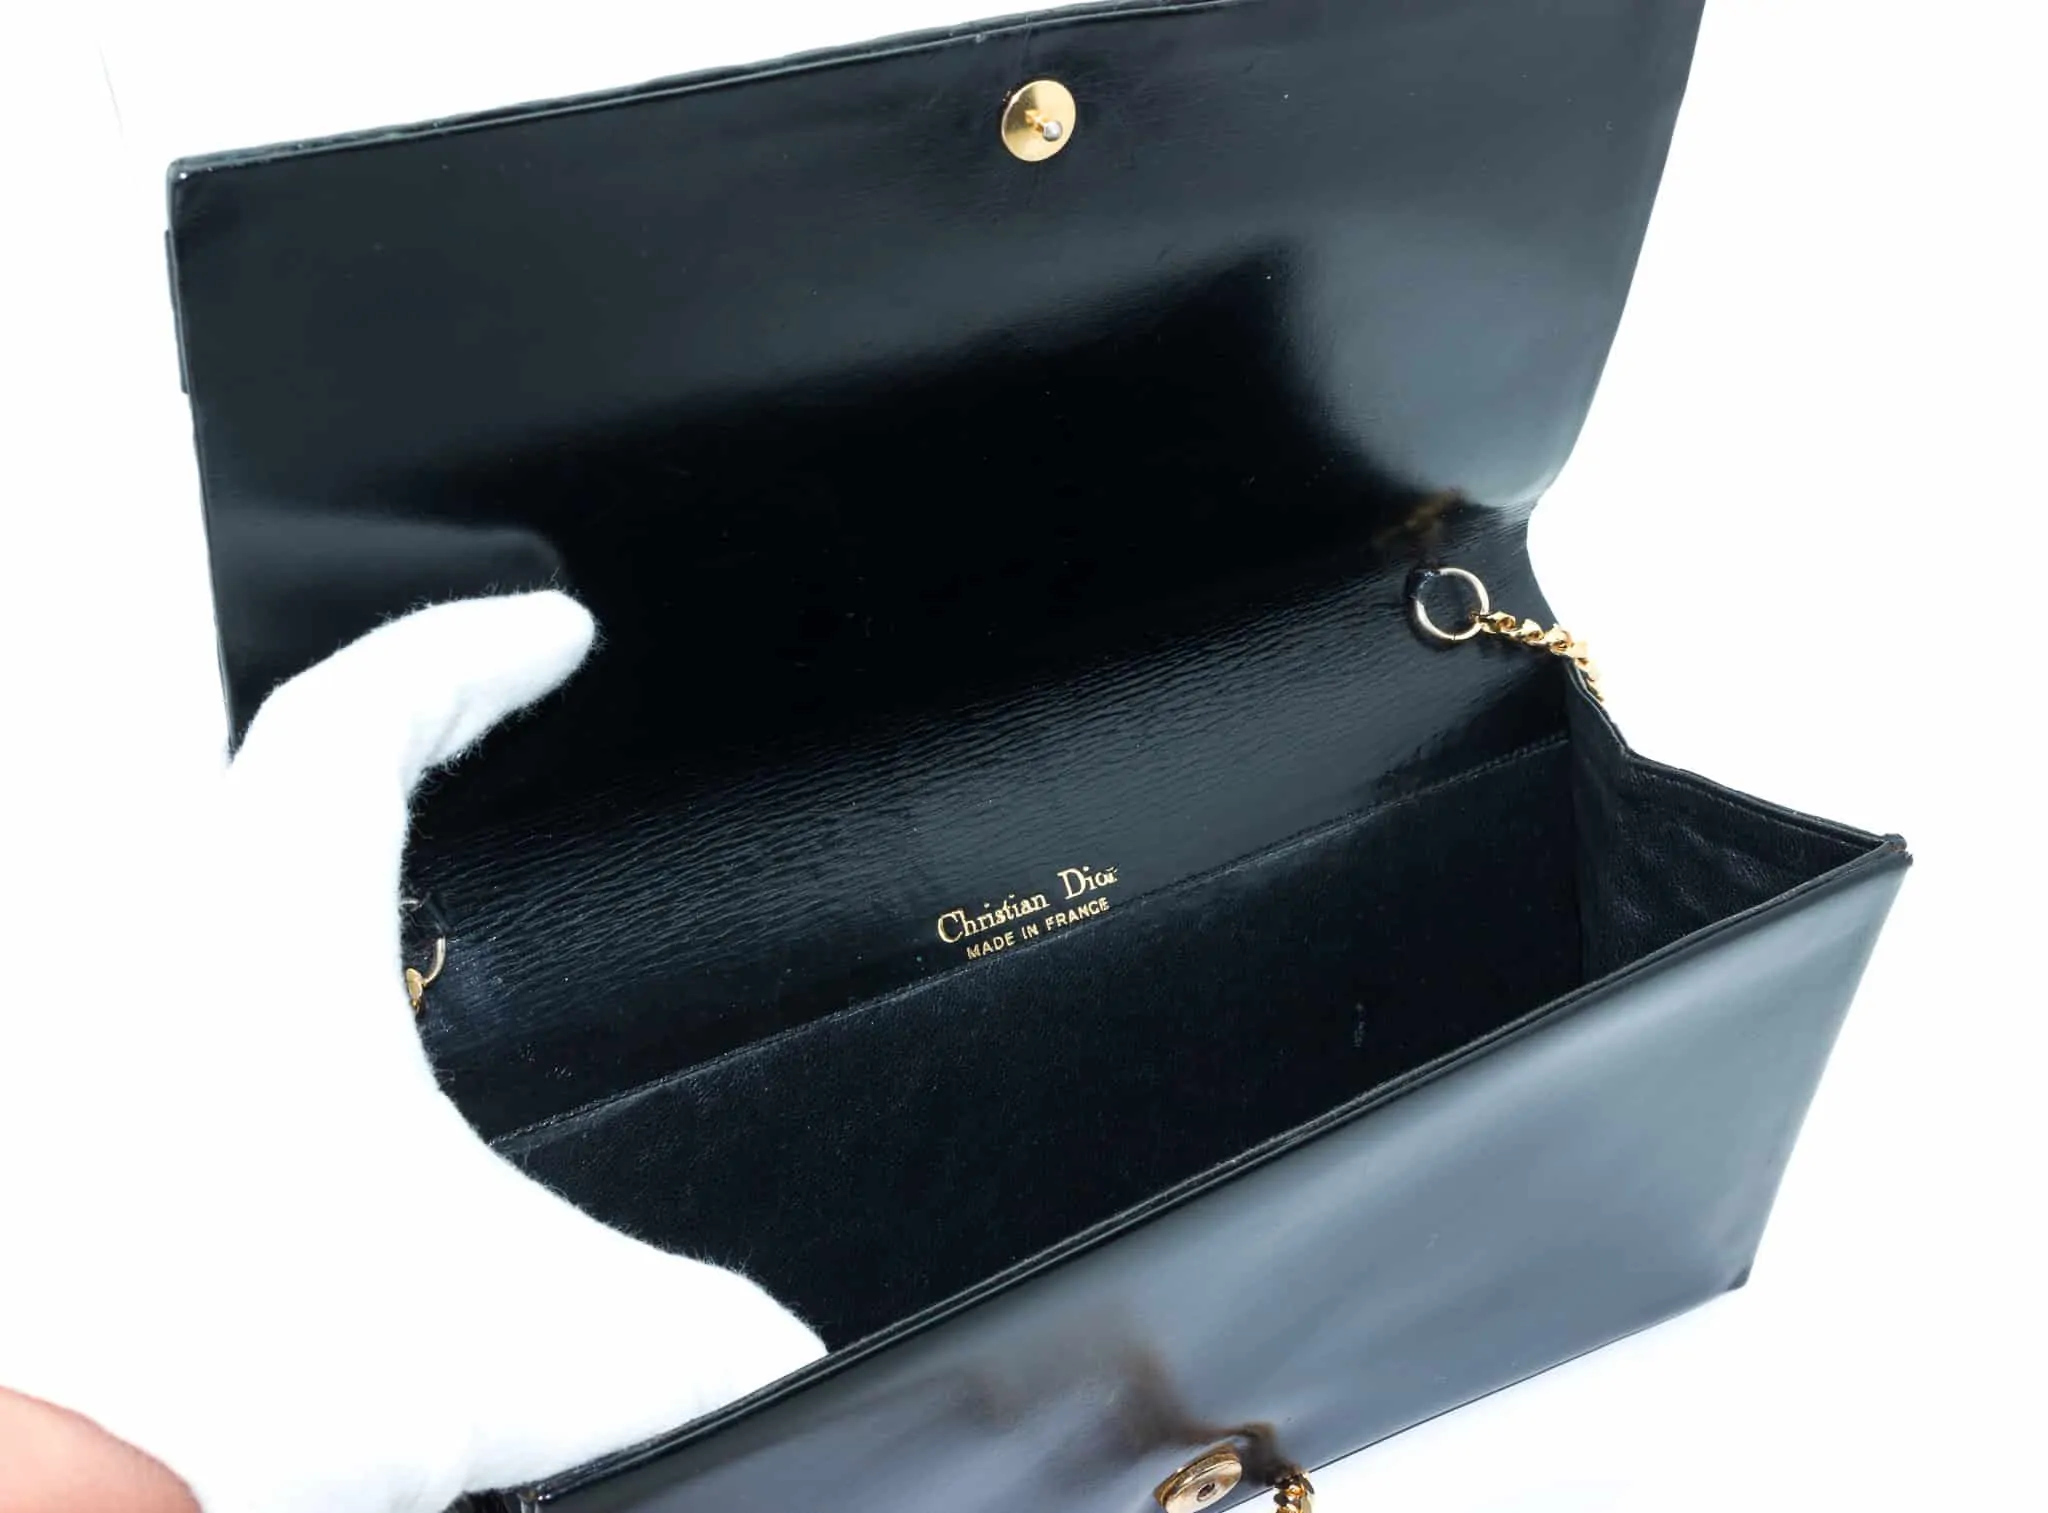 Sold at Auction: LOUIS VUITTON Jewelry Box 2011 VIP GIft Item